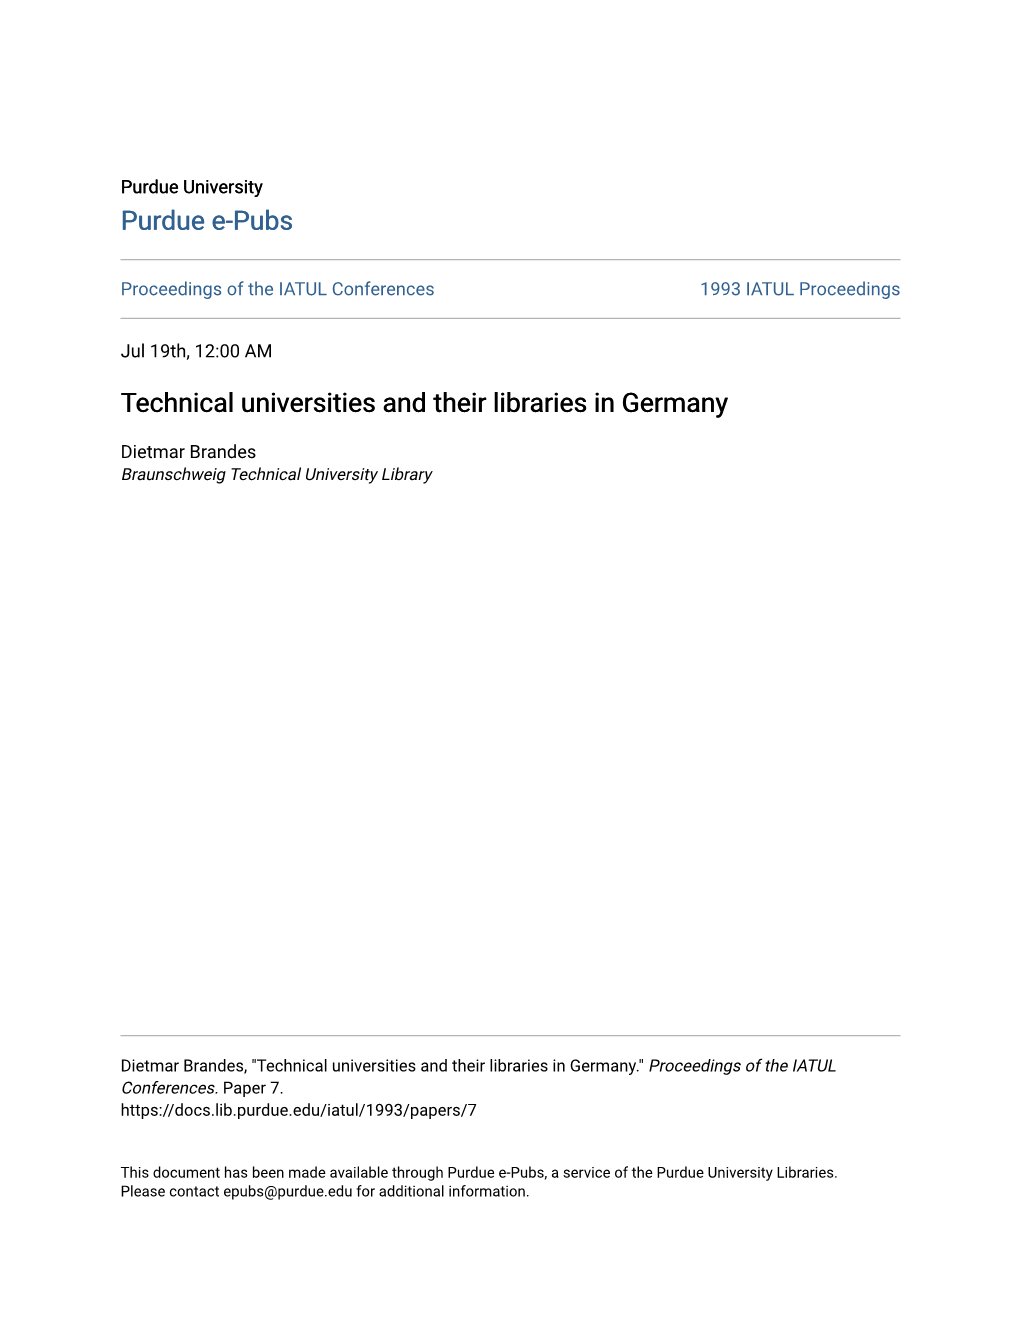 Technical Universities and Their Libraries in Germany